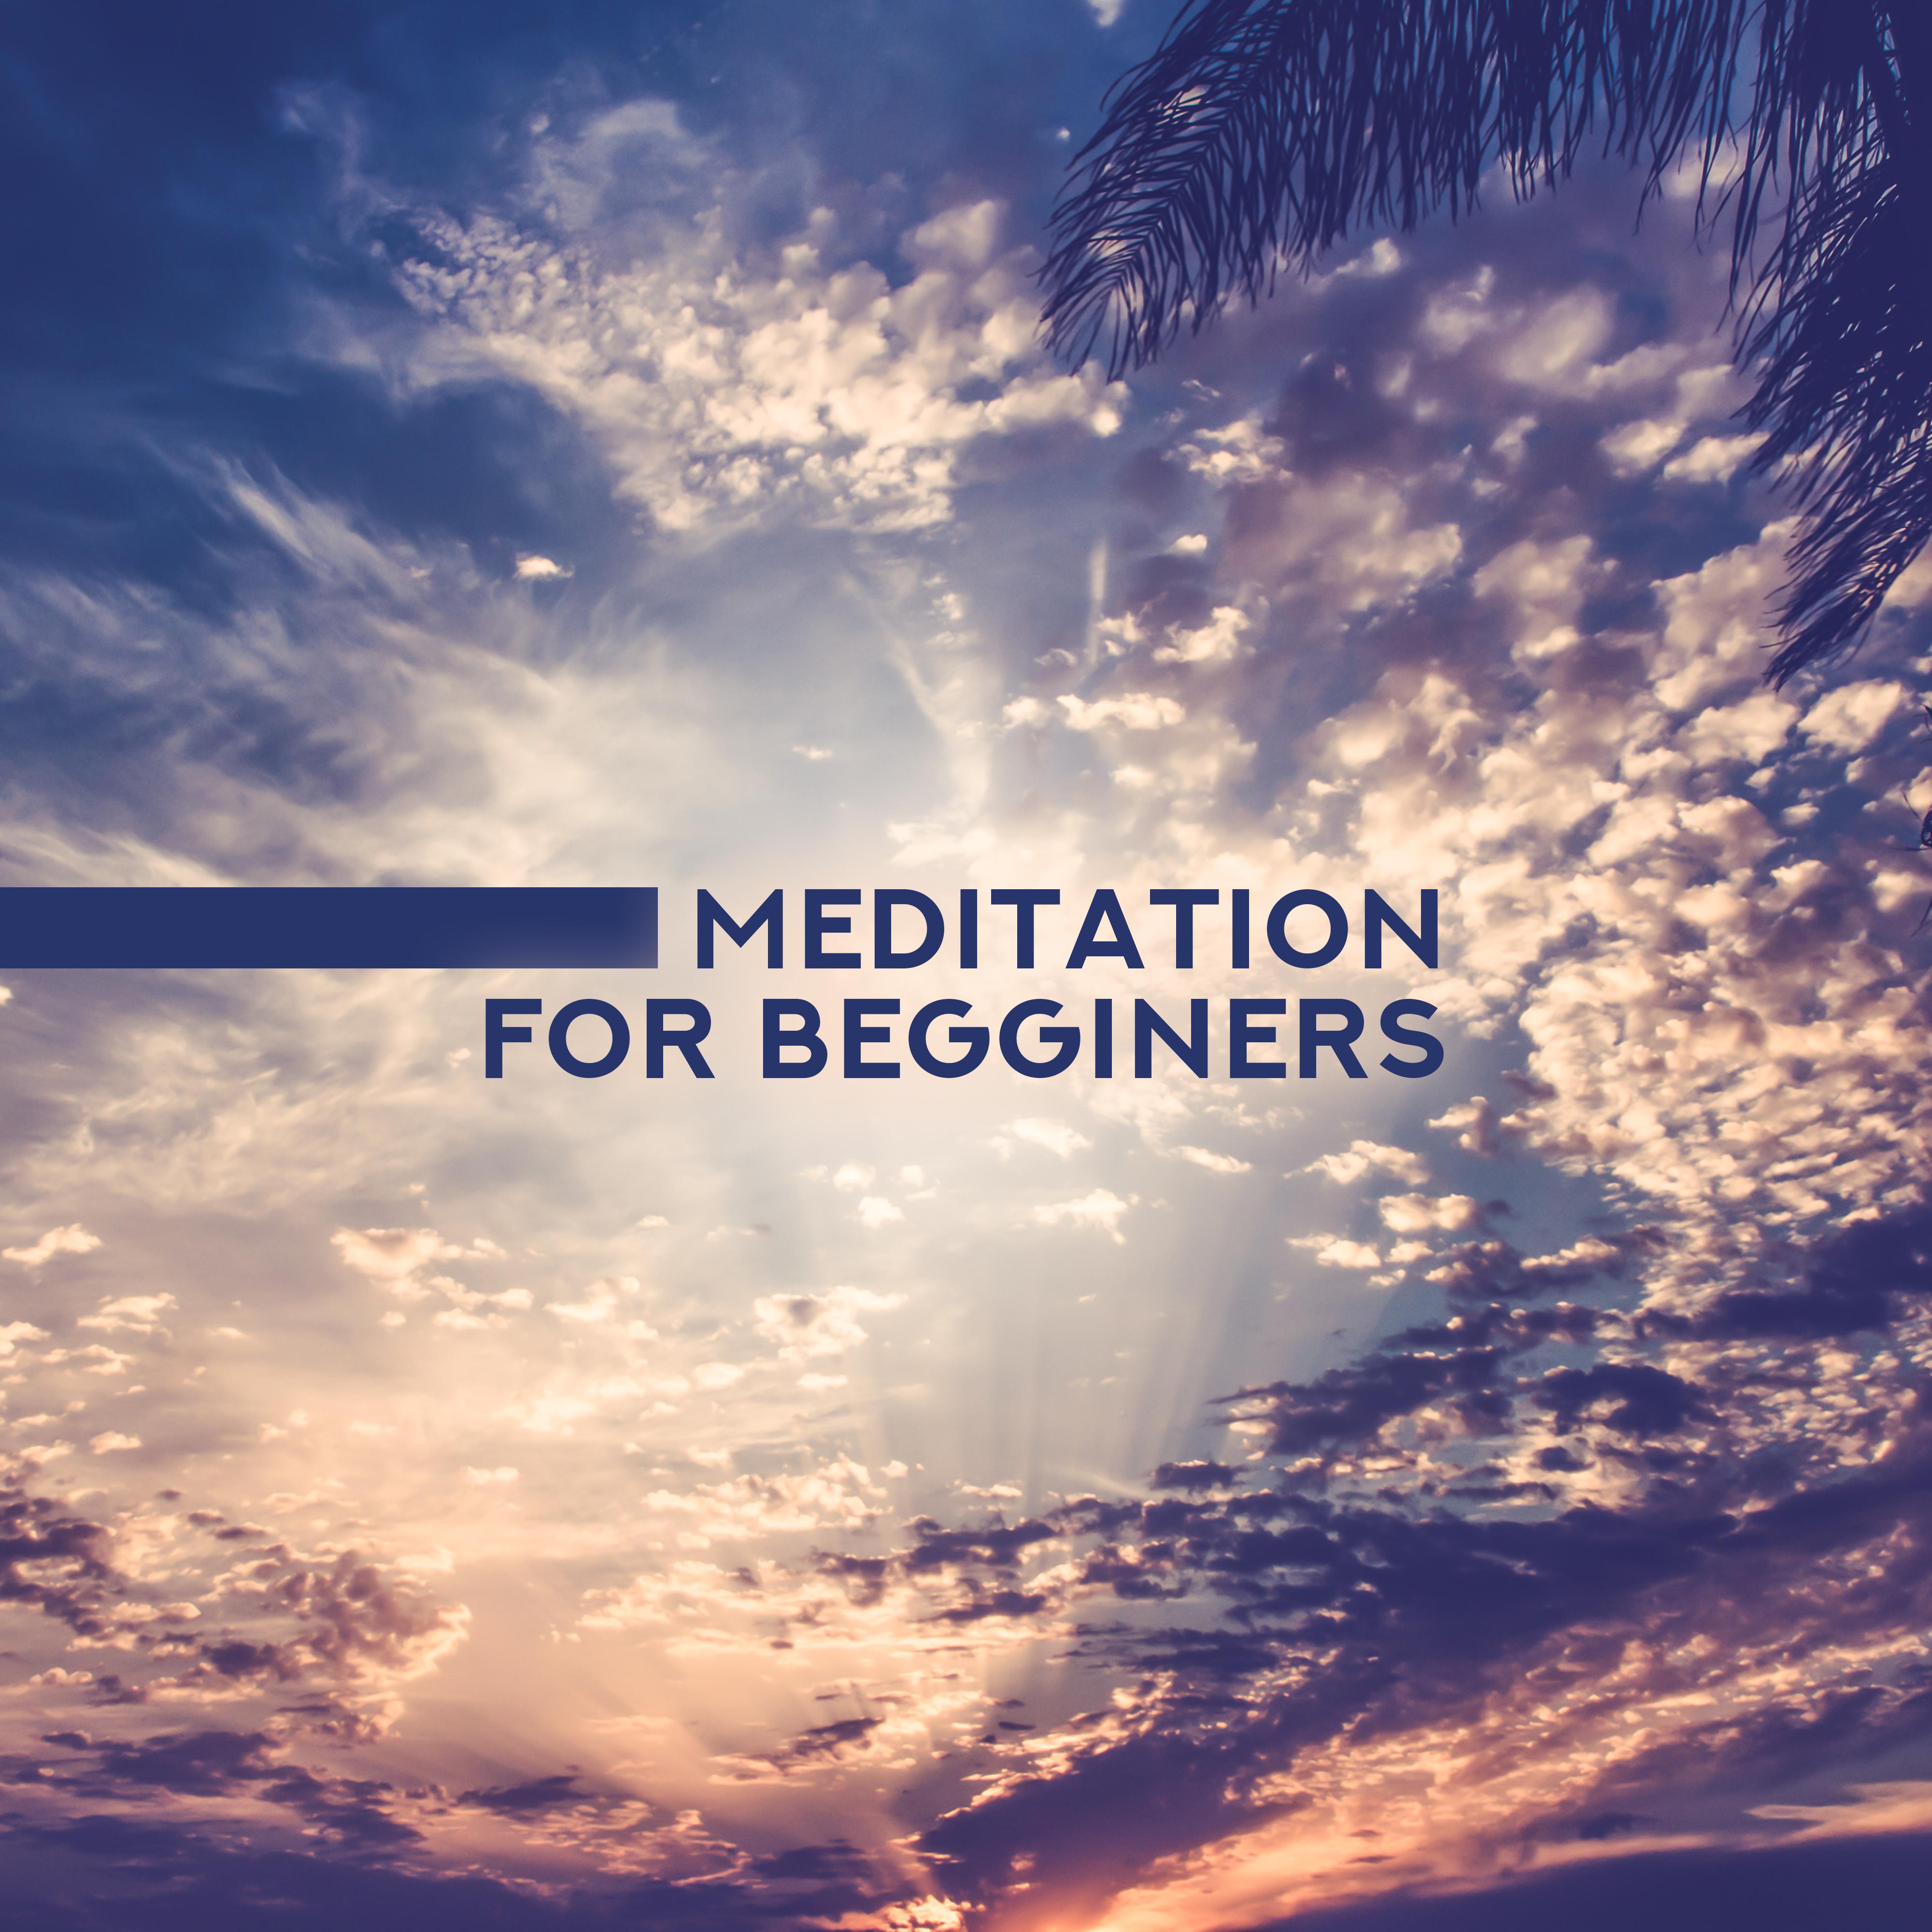 Meditation for Begginers – Yoga New Age Music for Meditation Therapy, Guided Relaxation